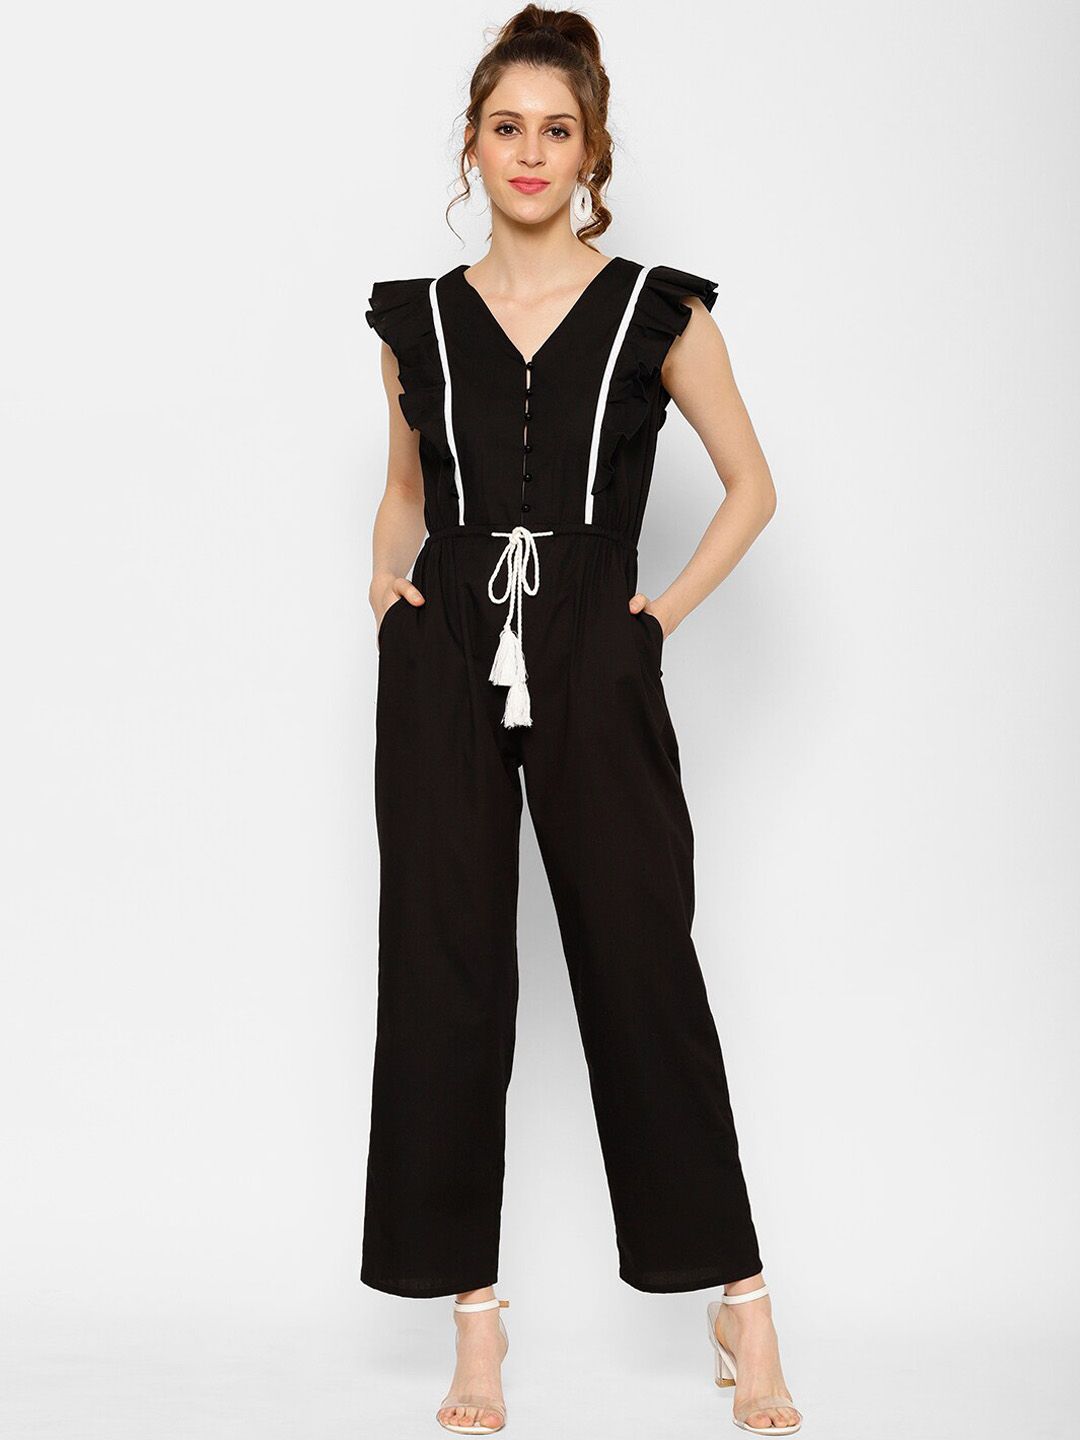 KASSUALLY Women Black Solid Cotton Basic Jumpsuit Price in India